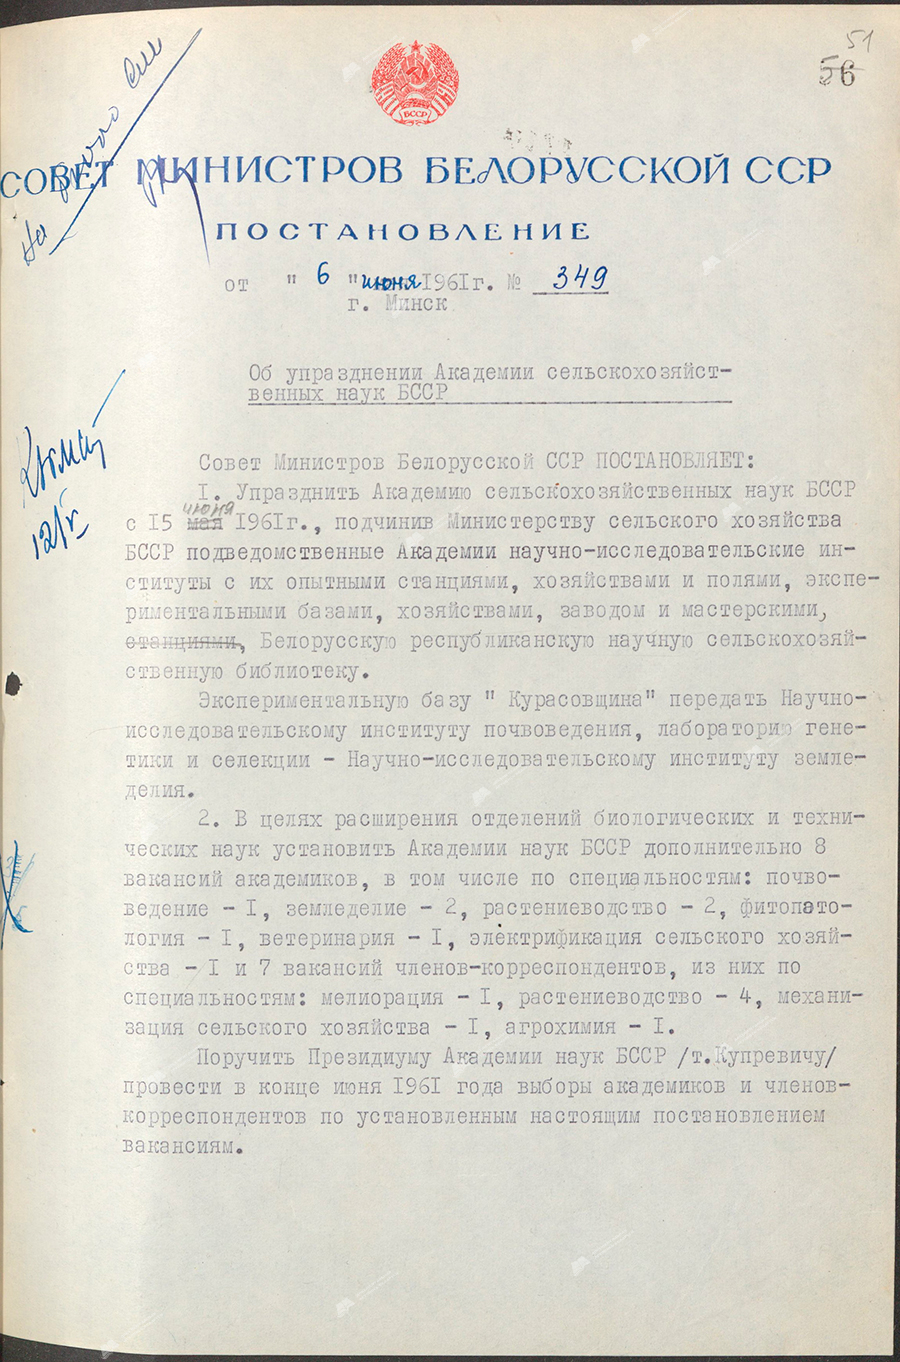 Resolution No. 349 «On the abolition of the Academy of Agricultural Sciences of the BSSR»-с. 0